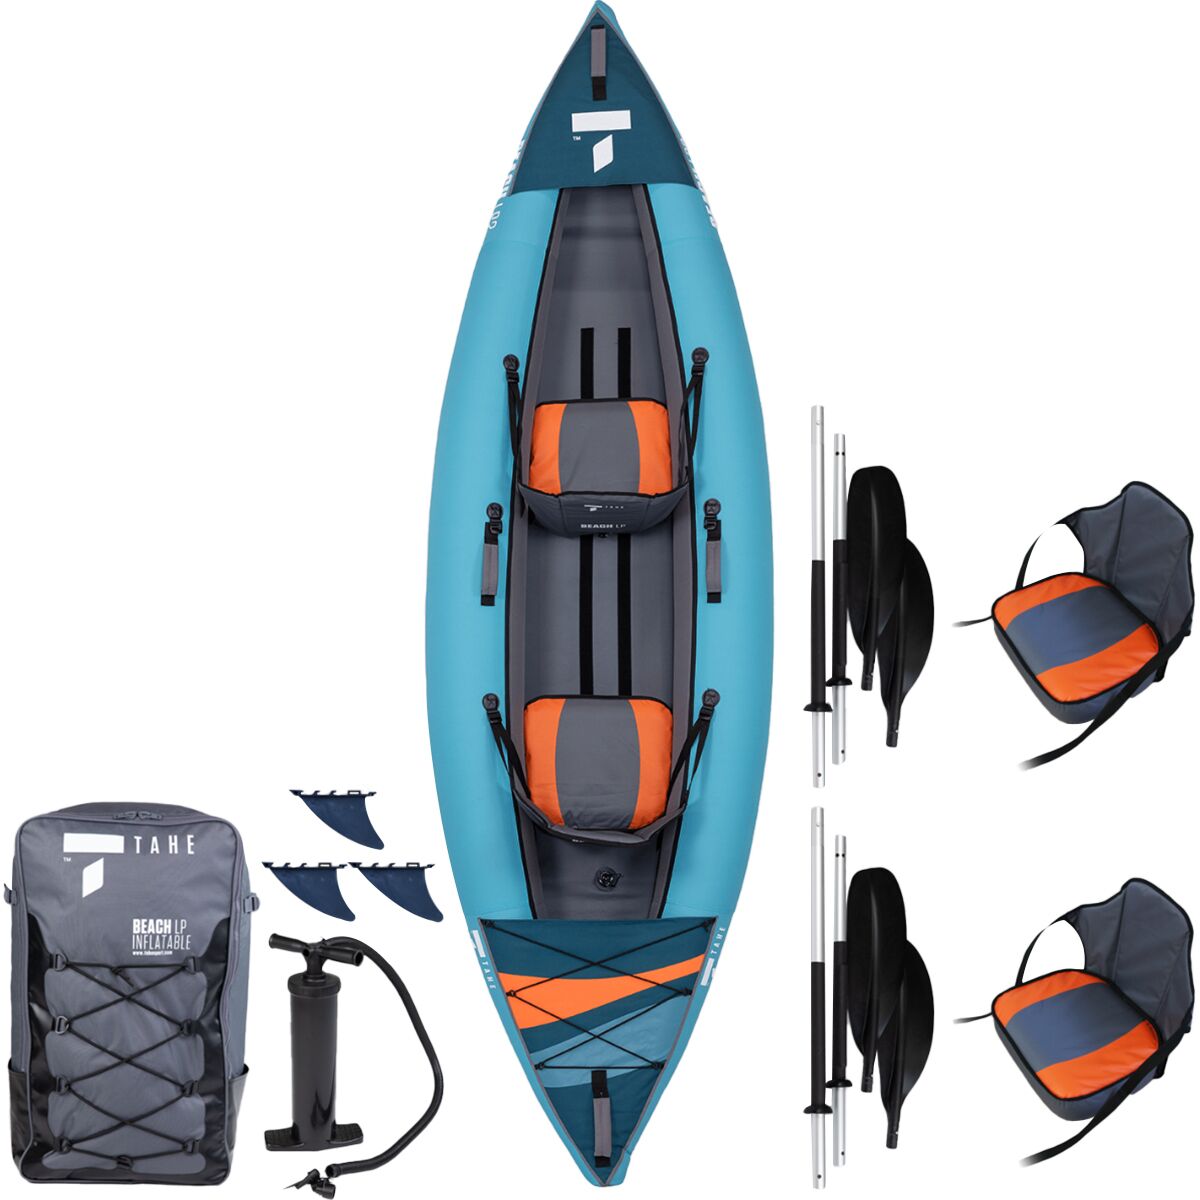 Beach LP1 inflatable kayak for one person - Complete package | TAHE